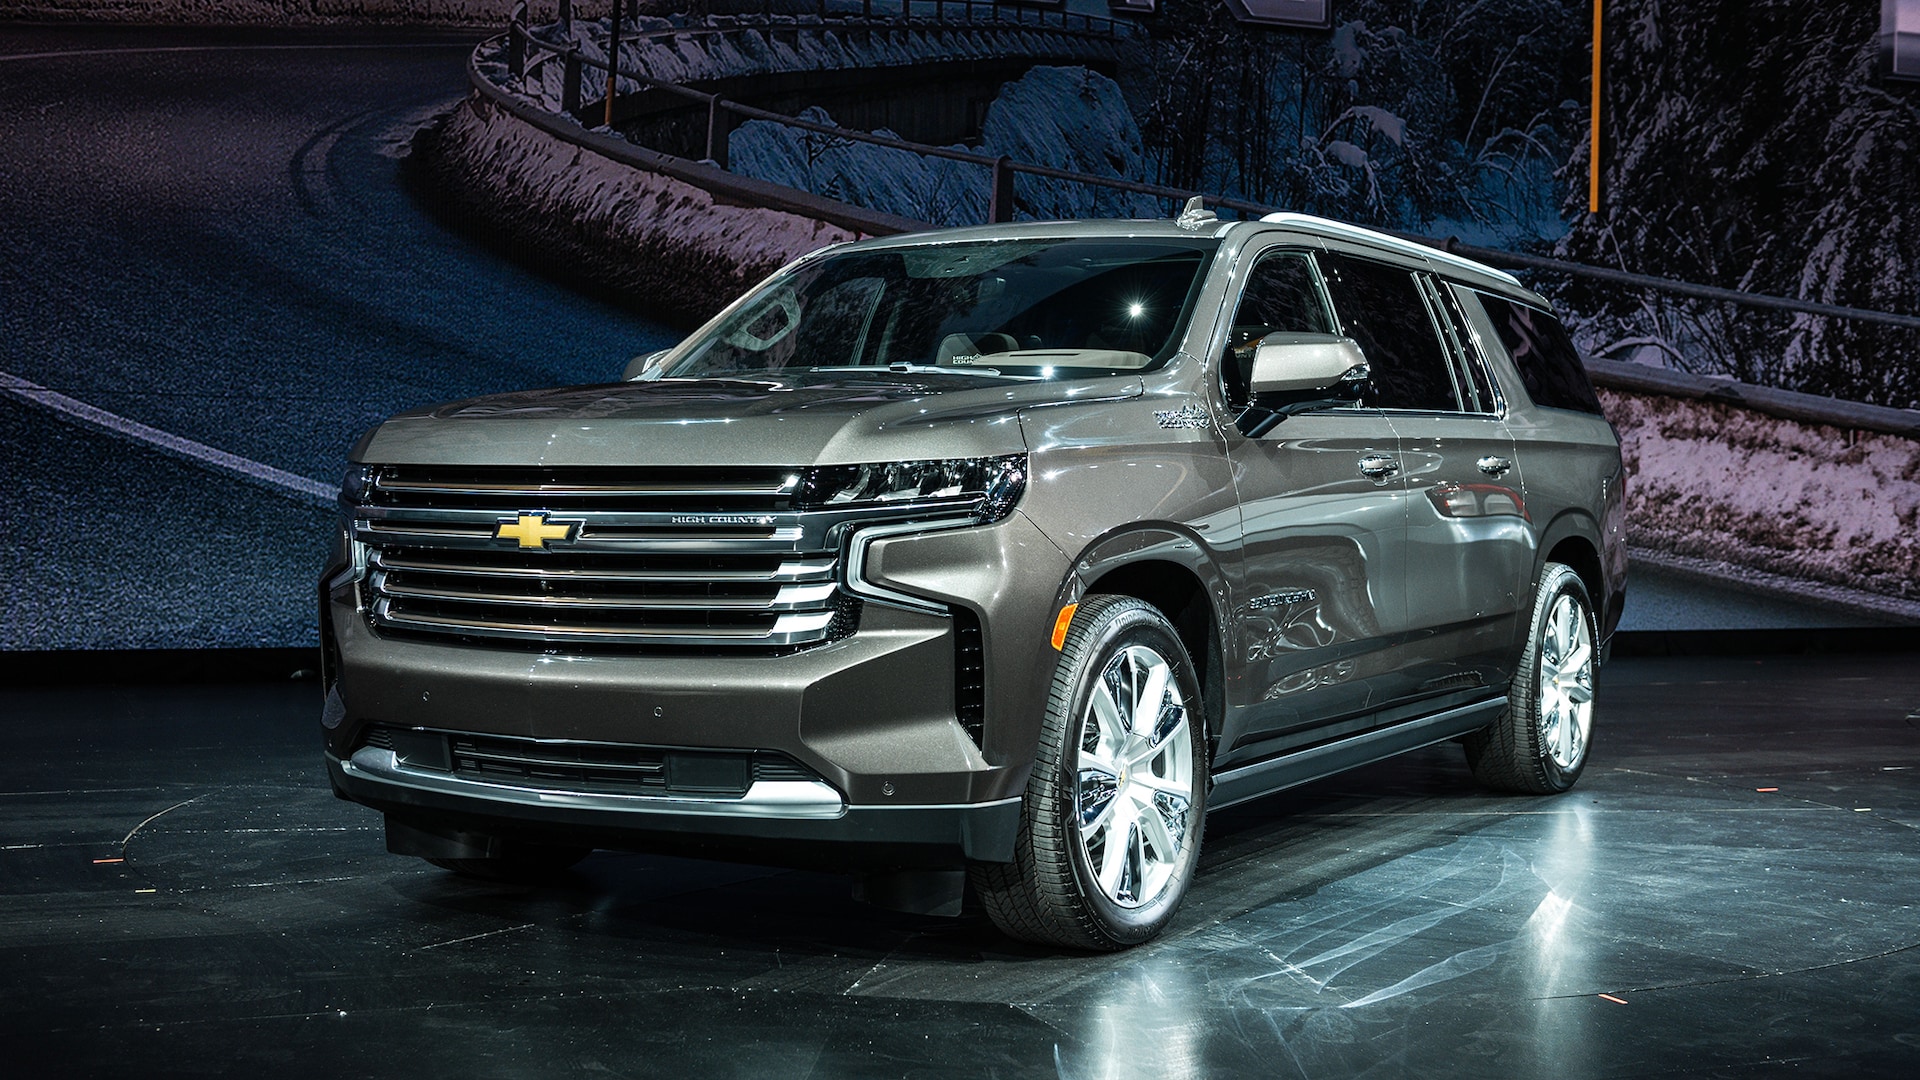 2021 Chevrolet Suburban First Look: Biggest and Baddest Full-Size SUV?